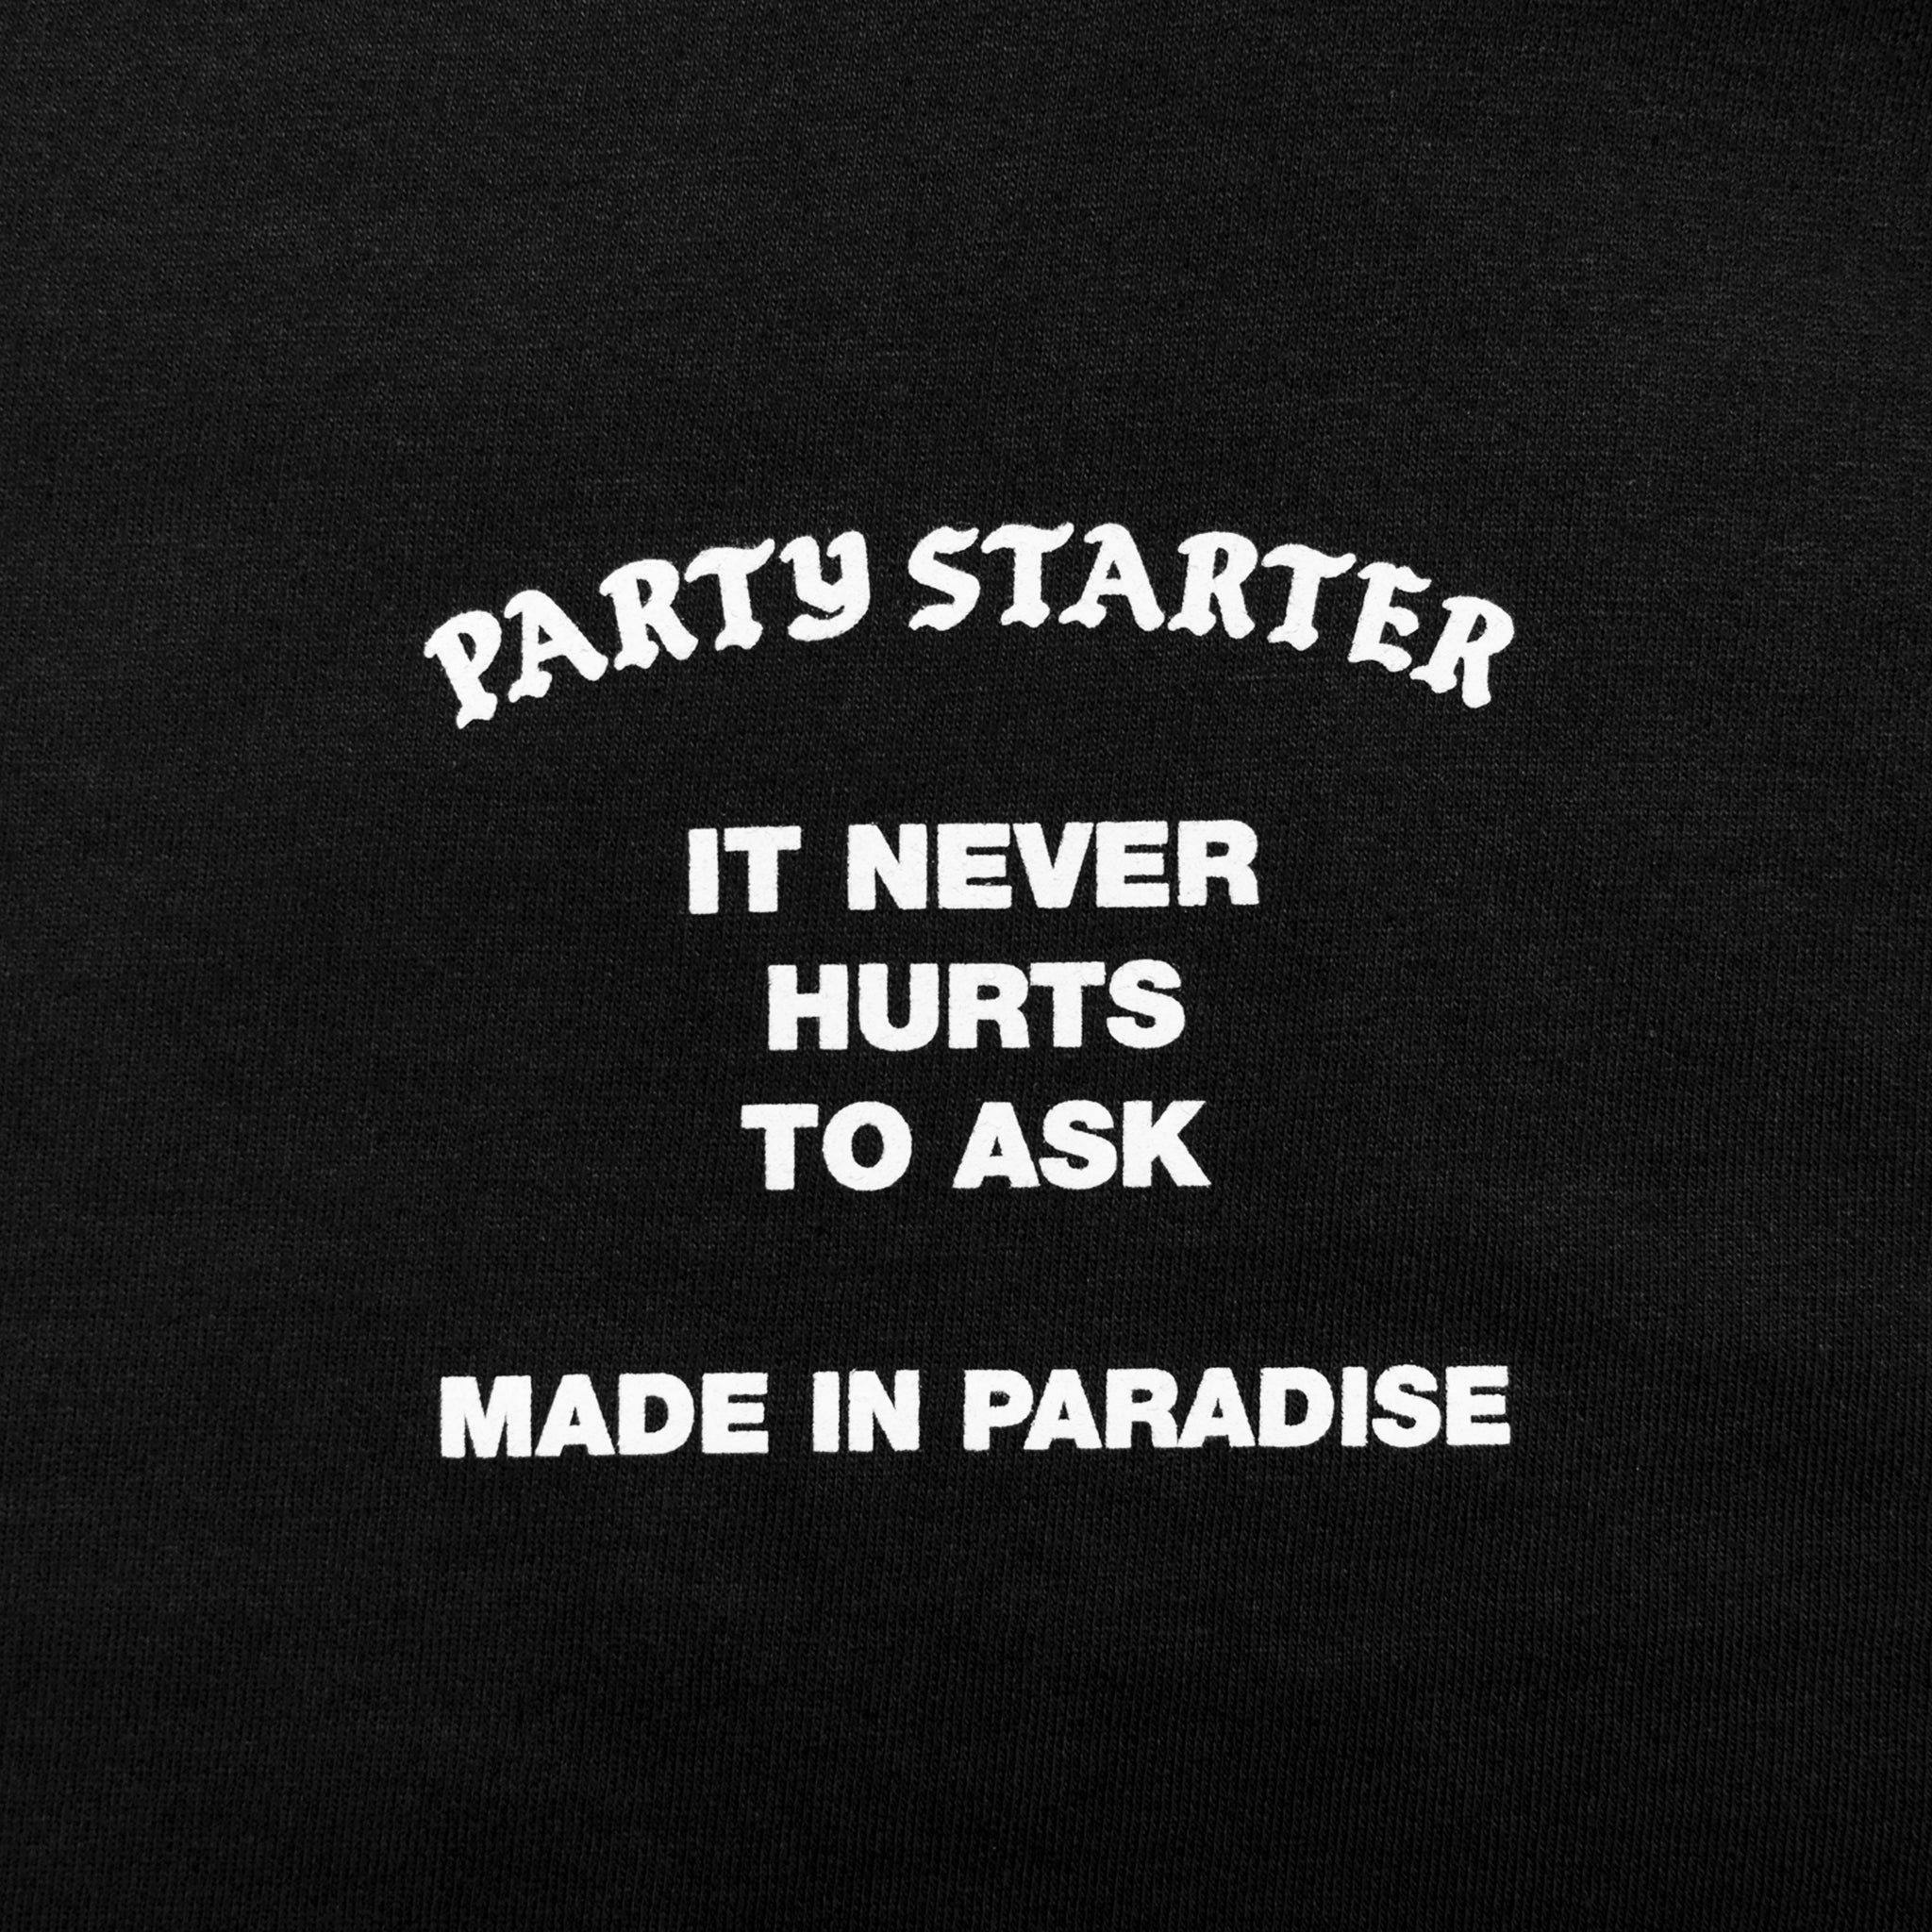 Close-up view of front graphic print of Made in Paradise World Drug Trade Collection "PARTY STARTER" black crewneck